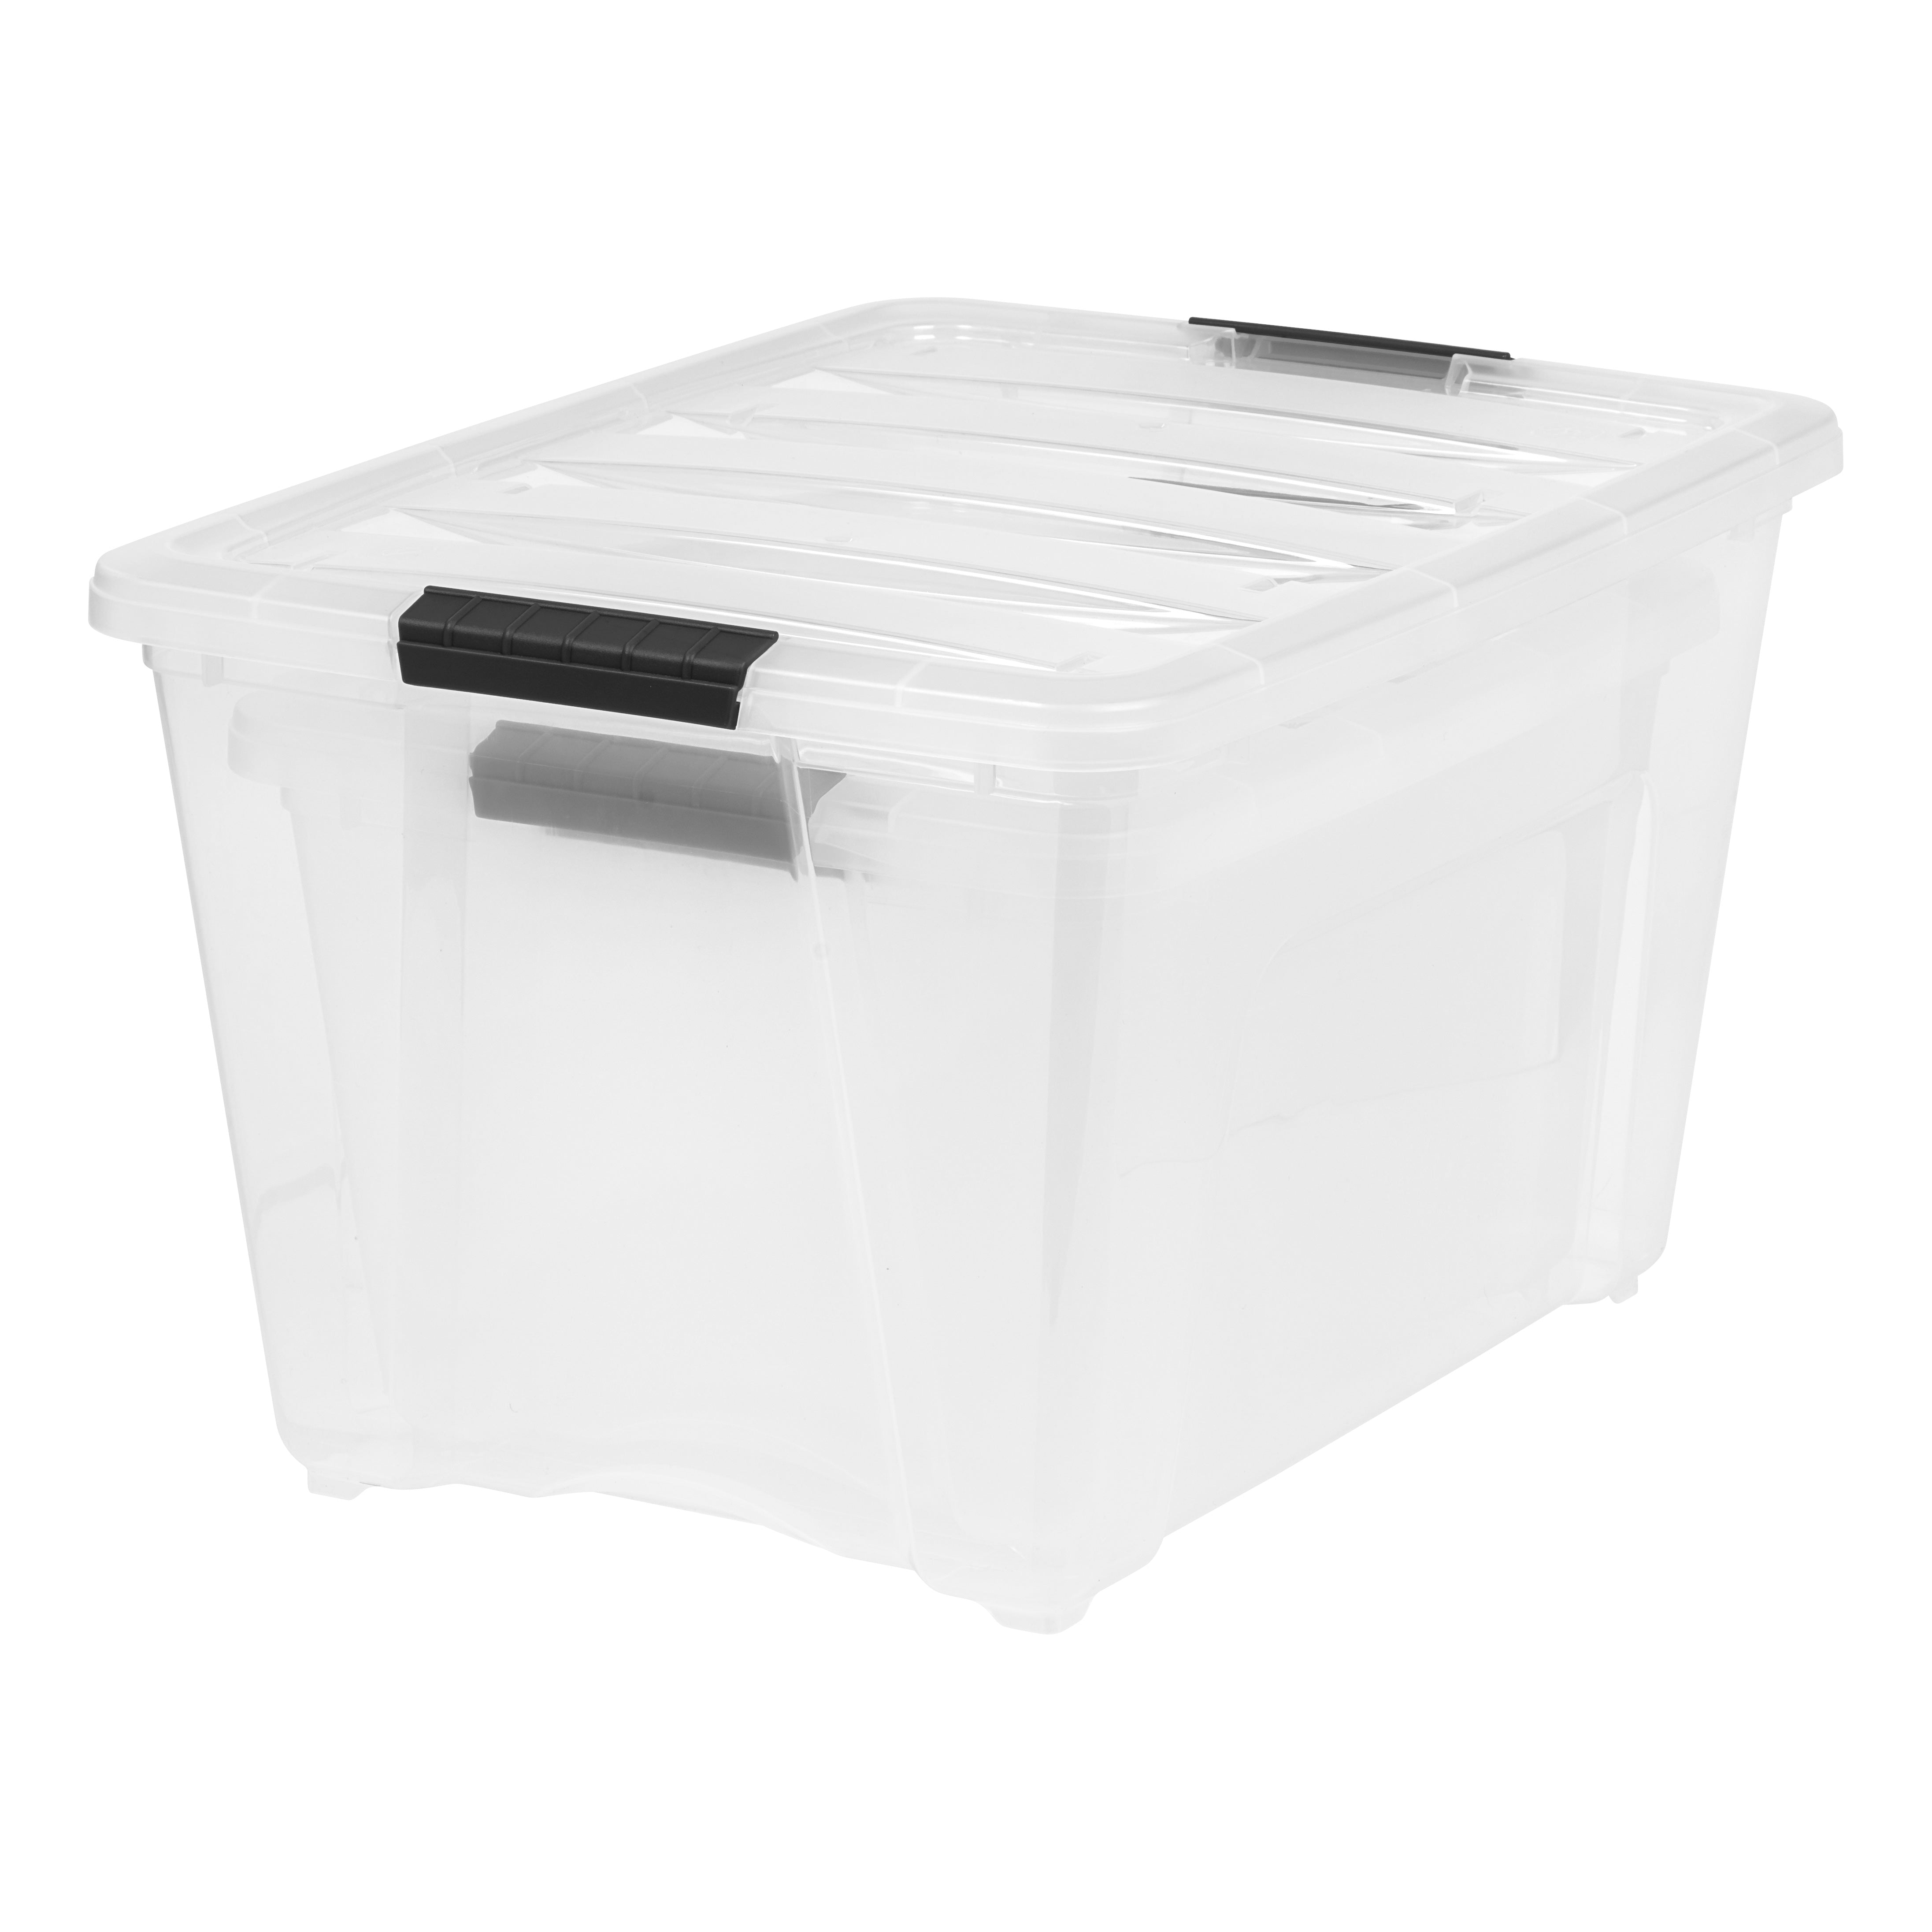 IRIS Store-It-All 21 Gal. Storage Tote with Metal Latches Set of 4 Bla